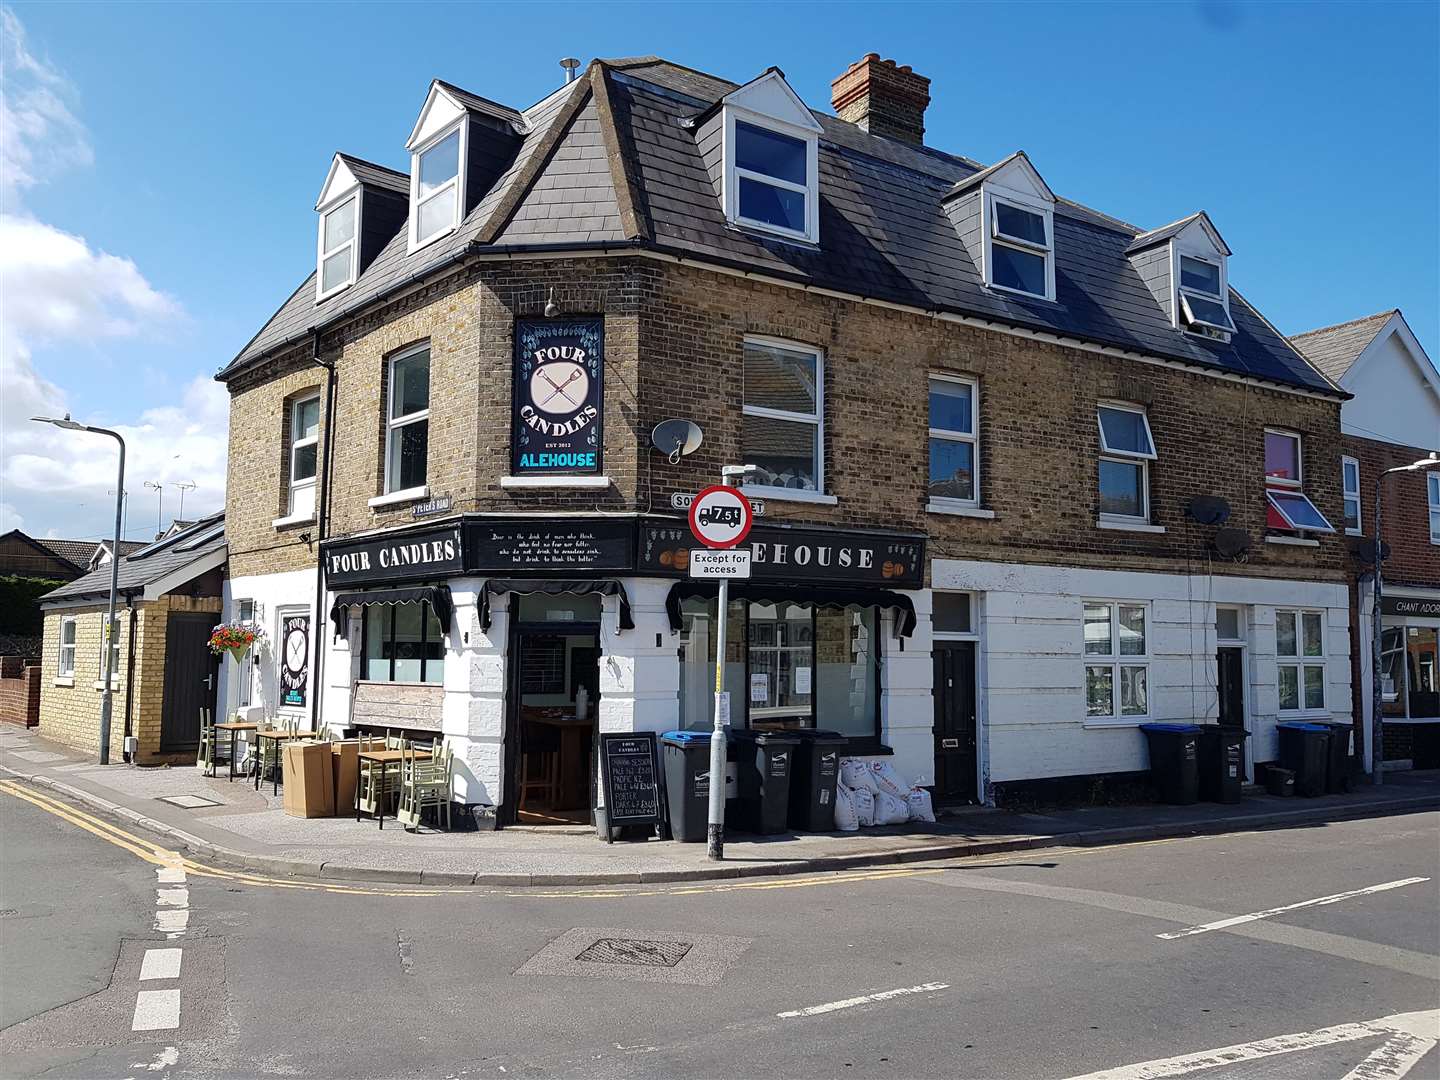 The Four Candles pub in Broadstairs brews all its own beers on site